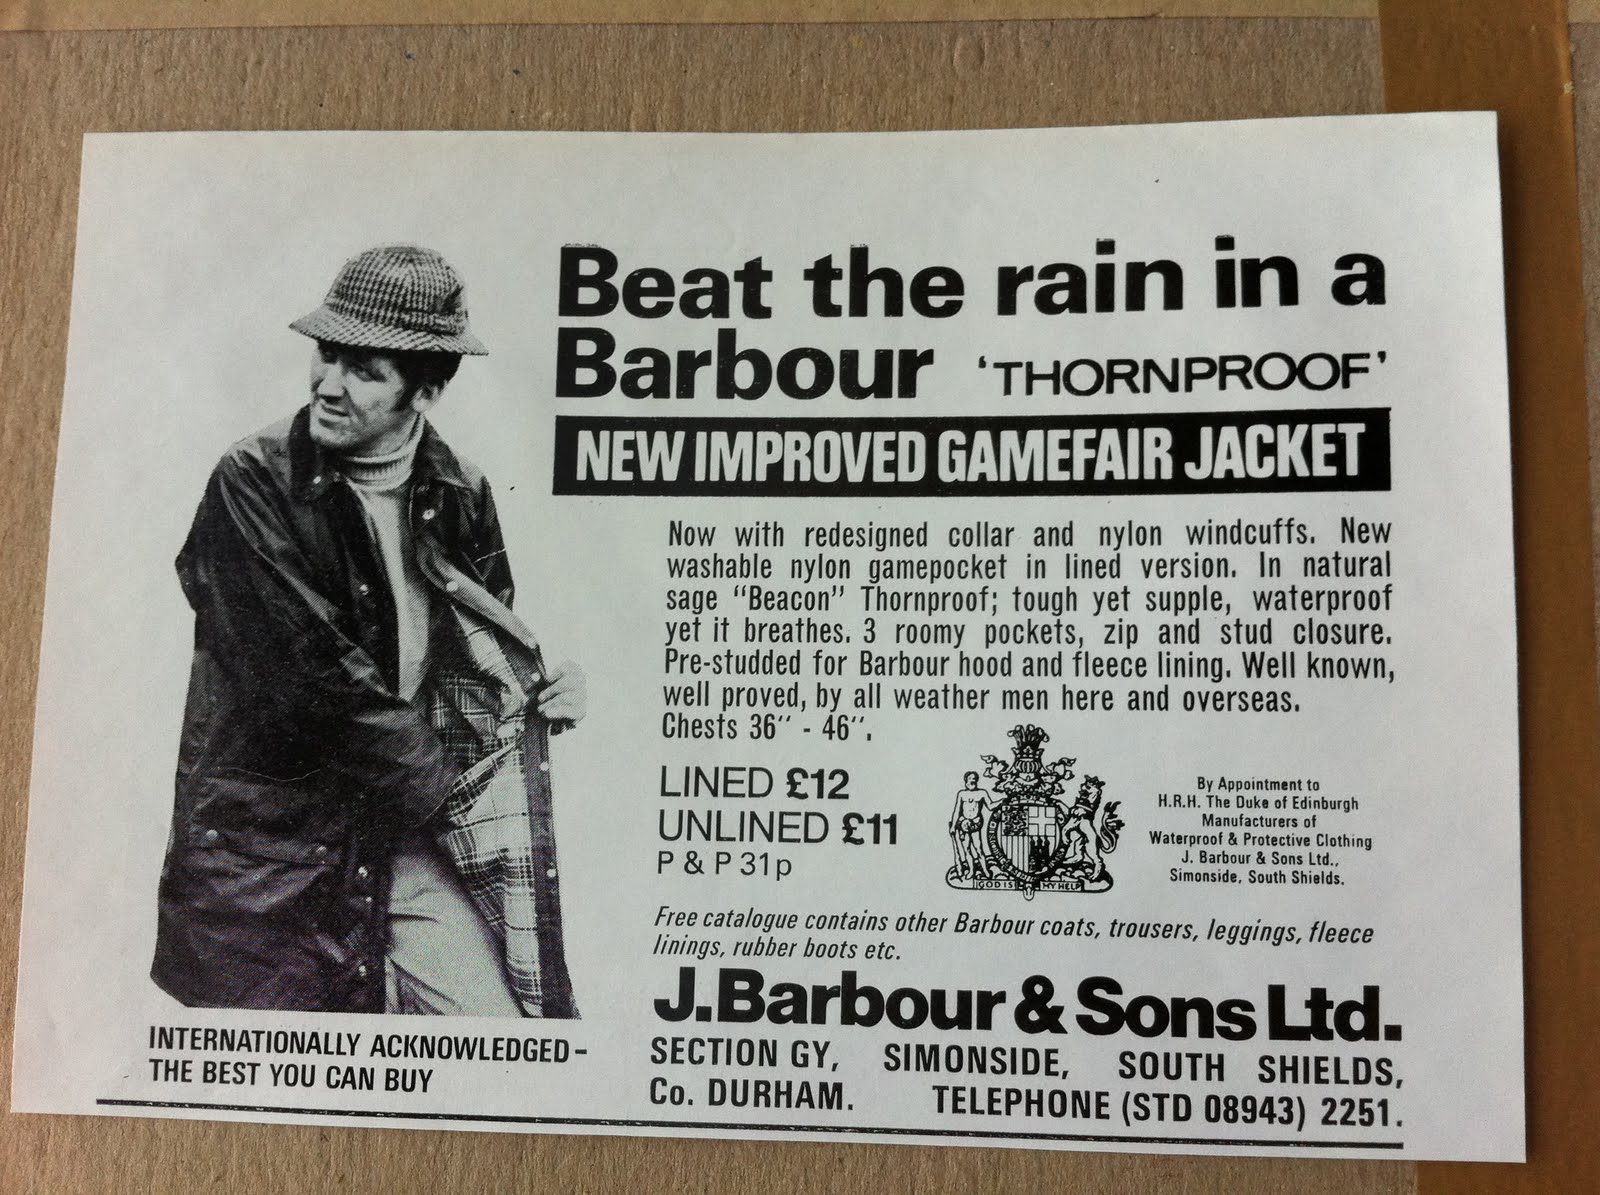 Thornproof: 1971 Barbour Ad